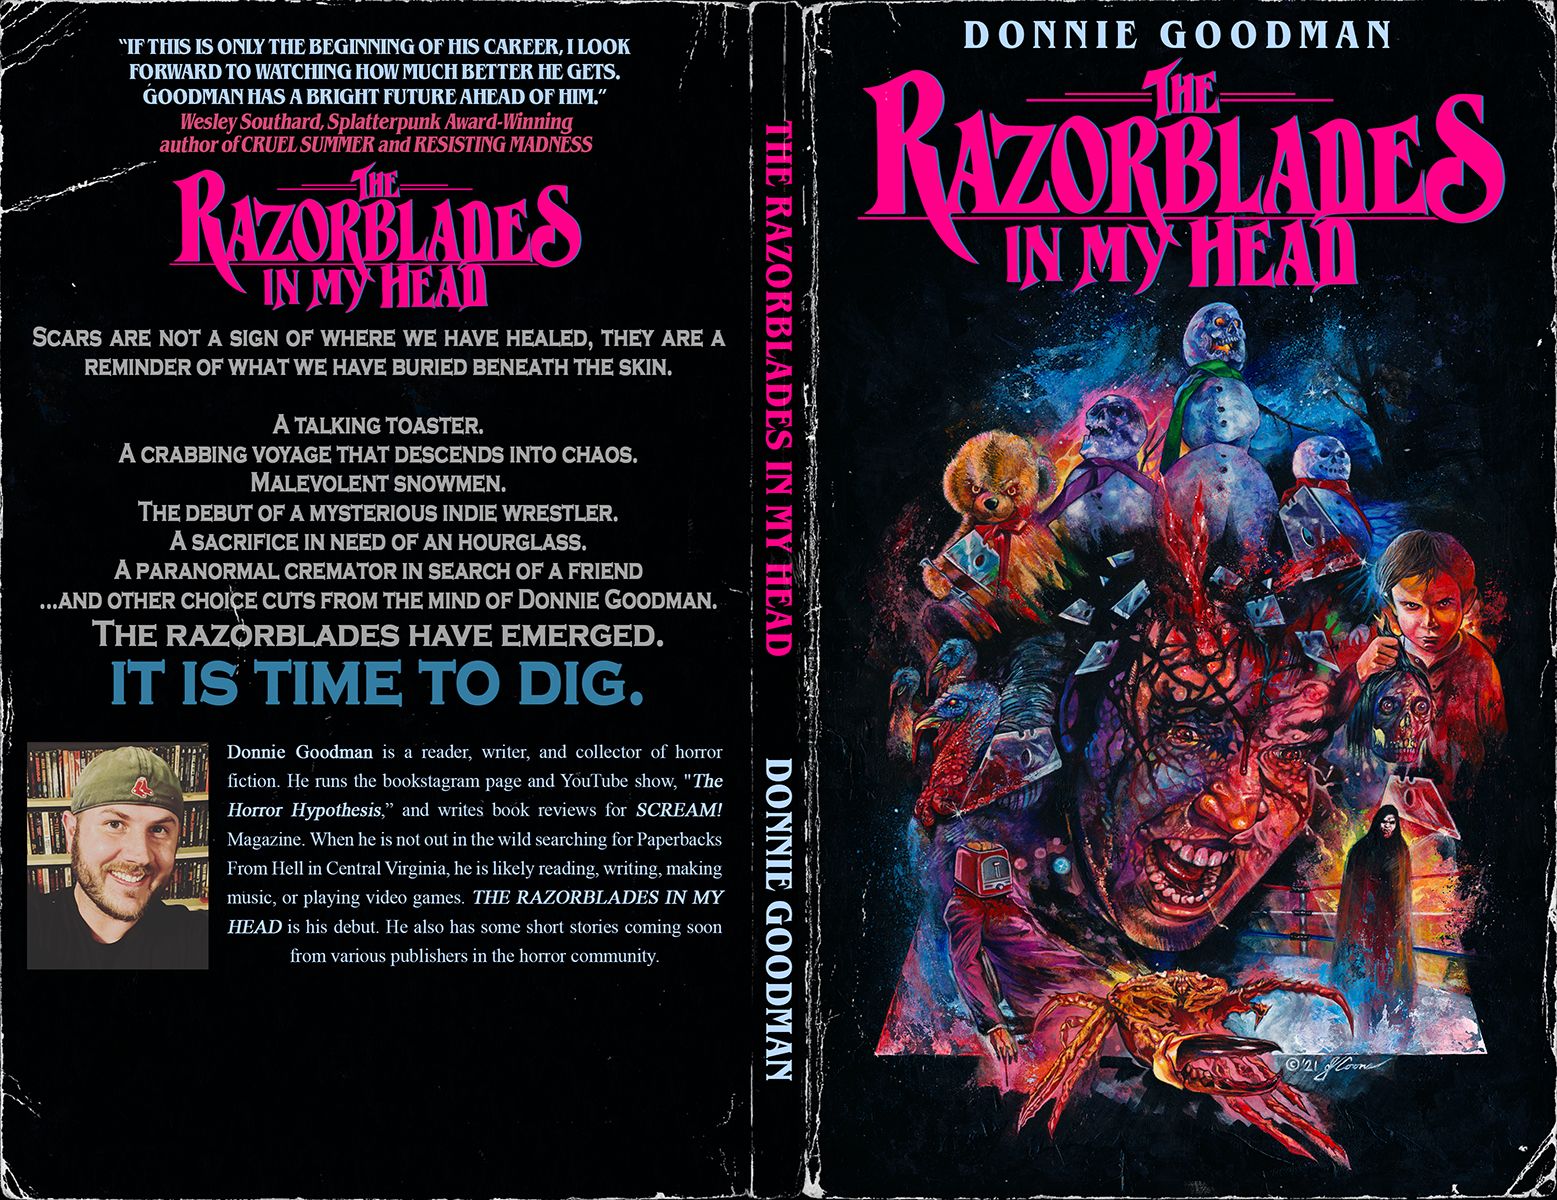 Celebrating the Book Release of THE RAZORBLADES IN MY HEAD by Donnie Goodman